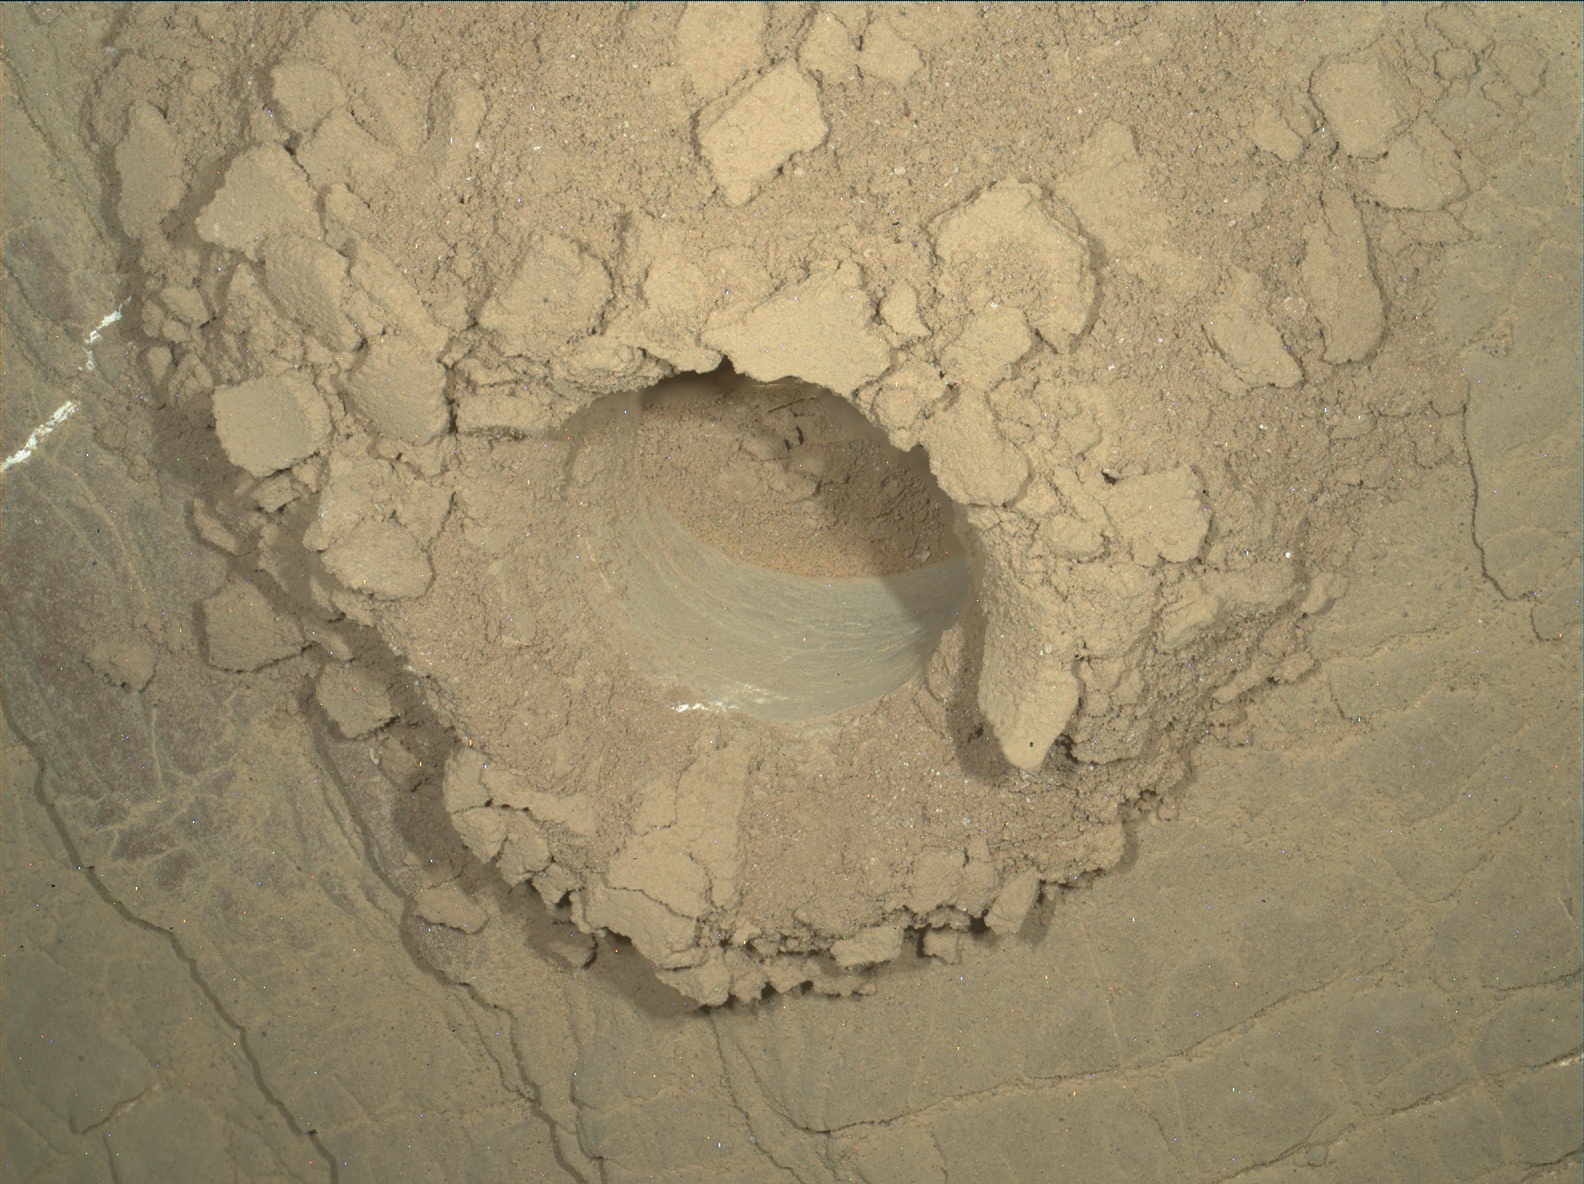 Nasa's Mars rover Curiosity acquired this image using its Mars Hand Lens Imager (MAHLI) on Sol 2529